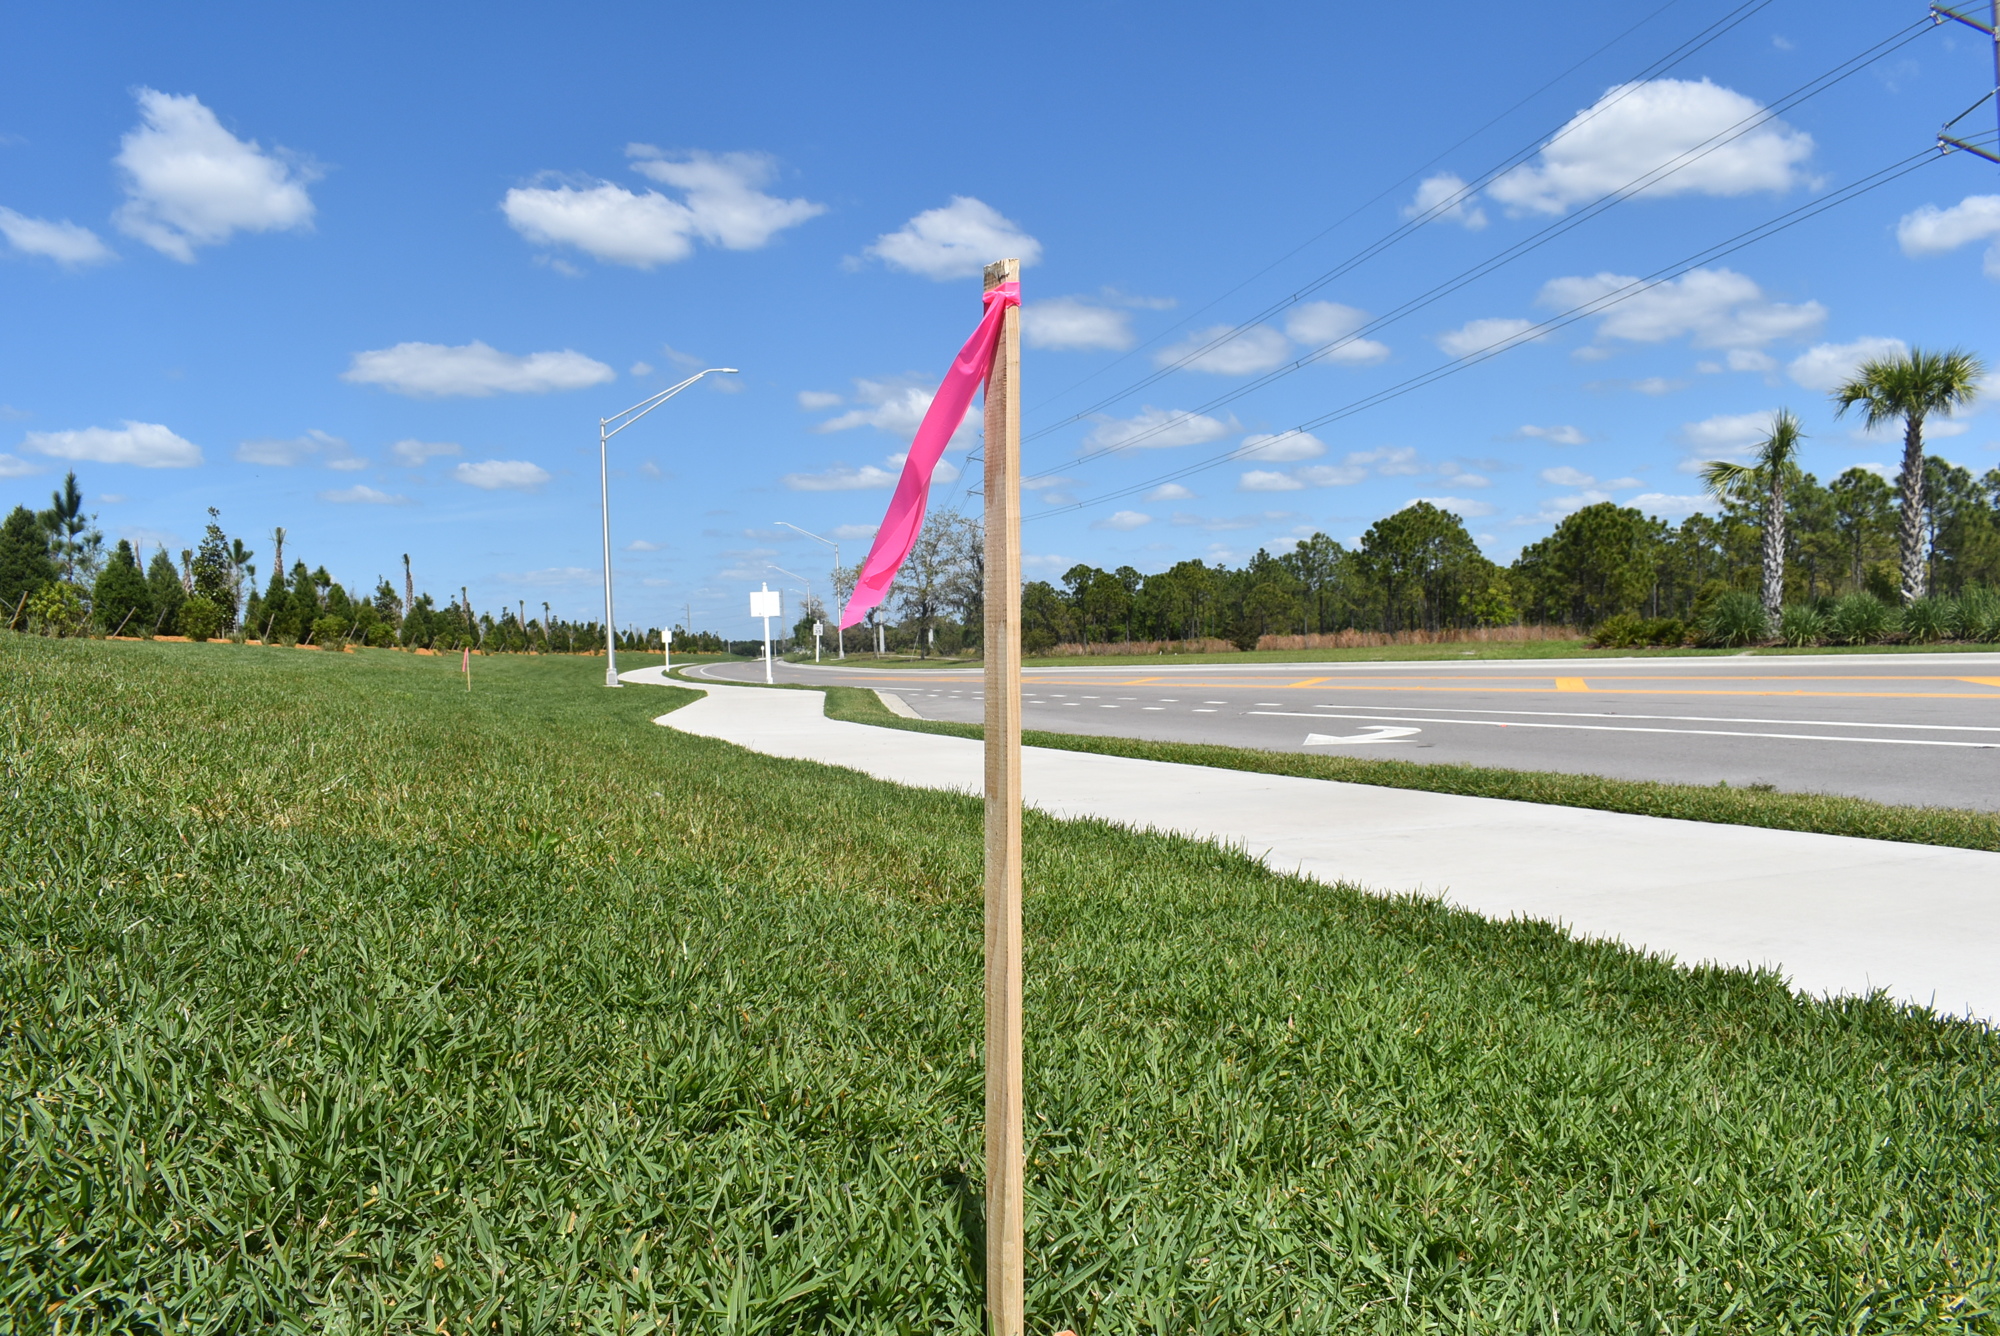 The portion of Manatee County's Future Development Area Boundary that is south of State Road 64 is located on Bourneside Boulevard. The land east of the line (right of the pictured stake) is protected from urban sprawl.